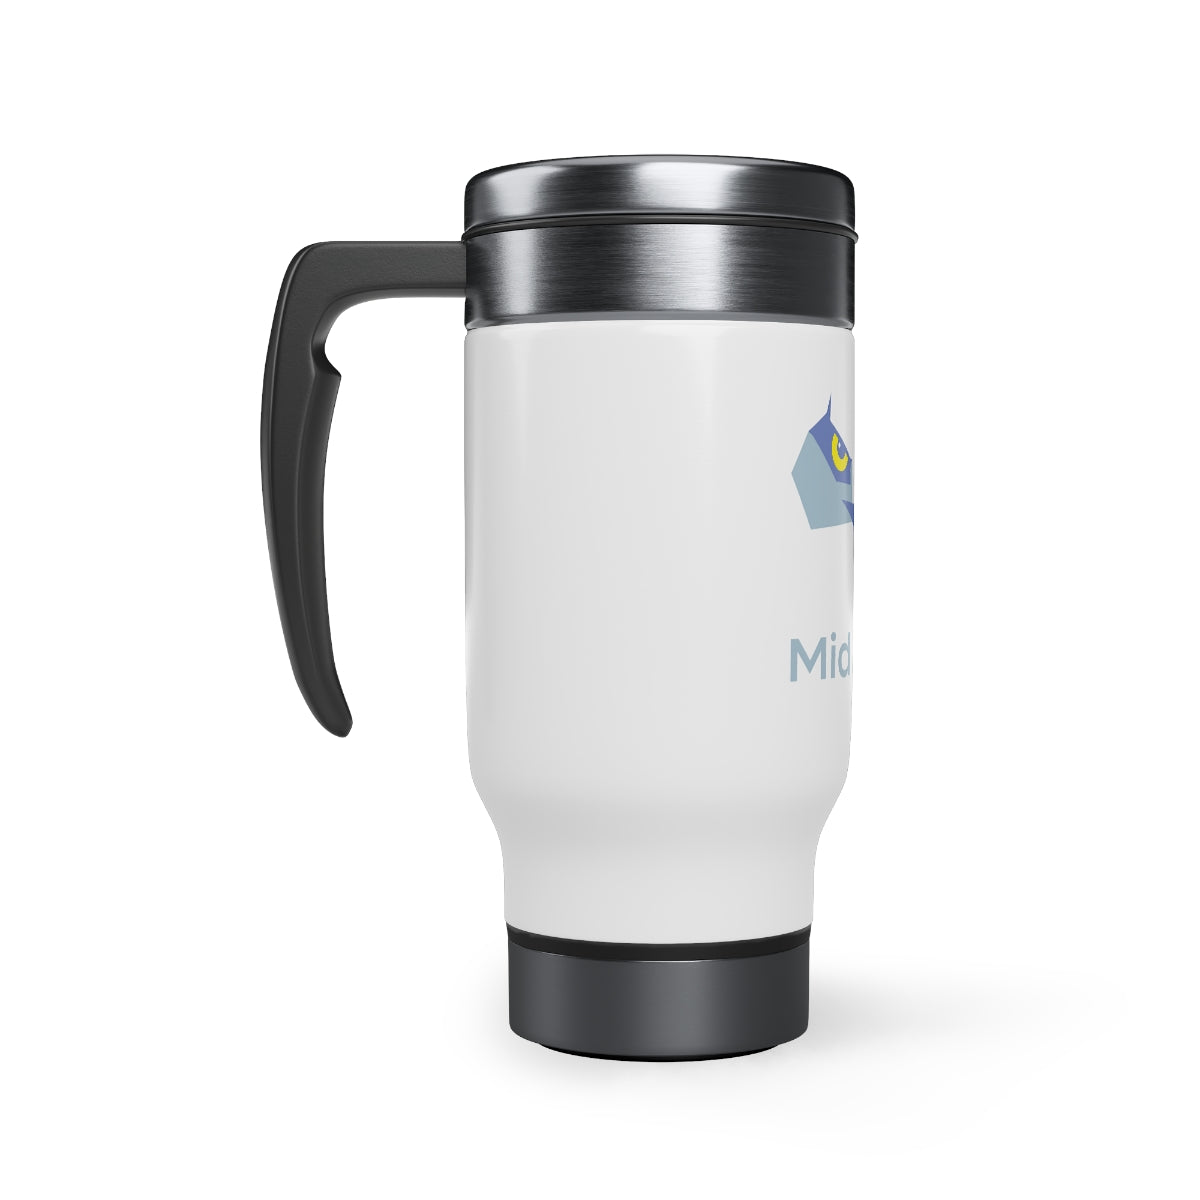 MACXIFY Stainless Steel Travel Mug with Handle, 14oz